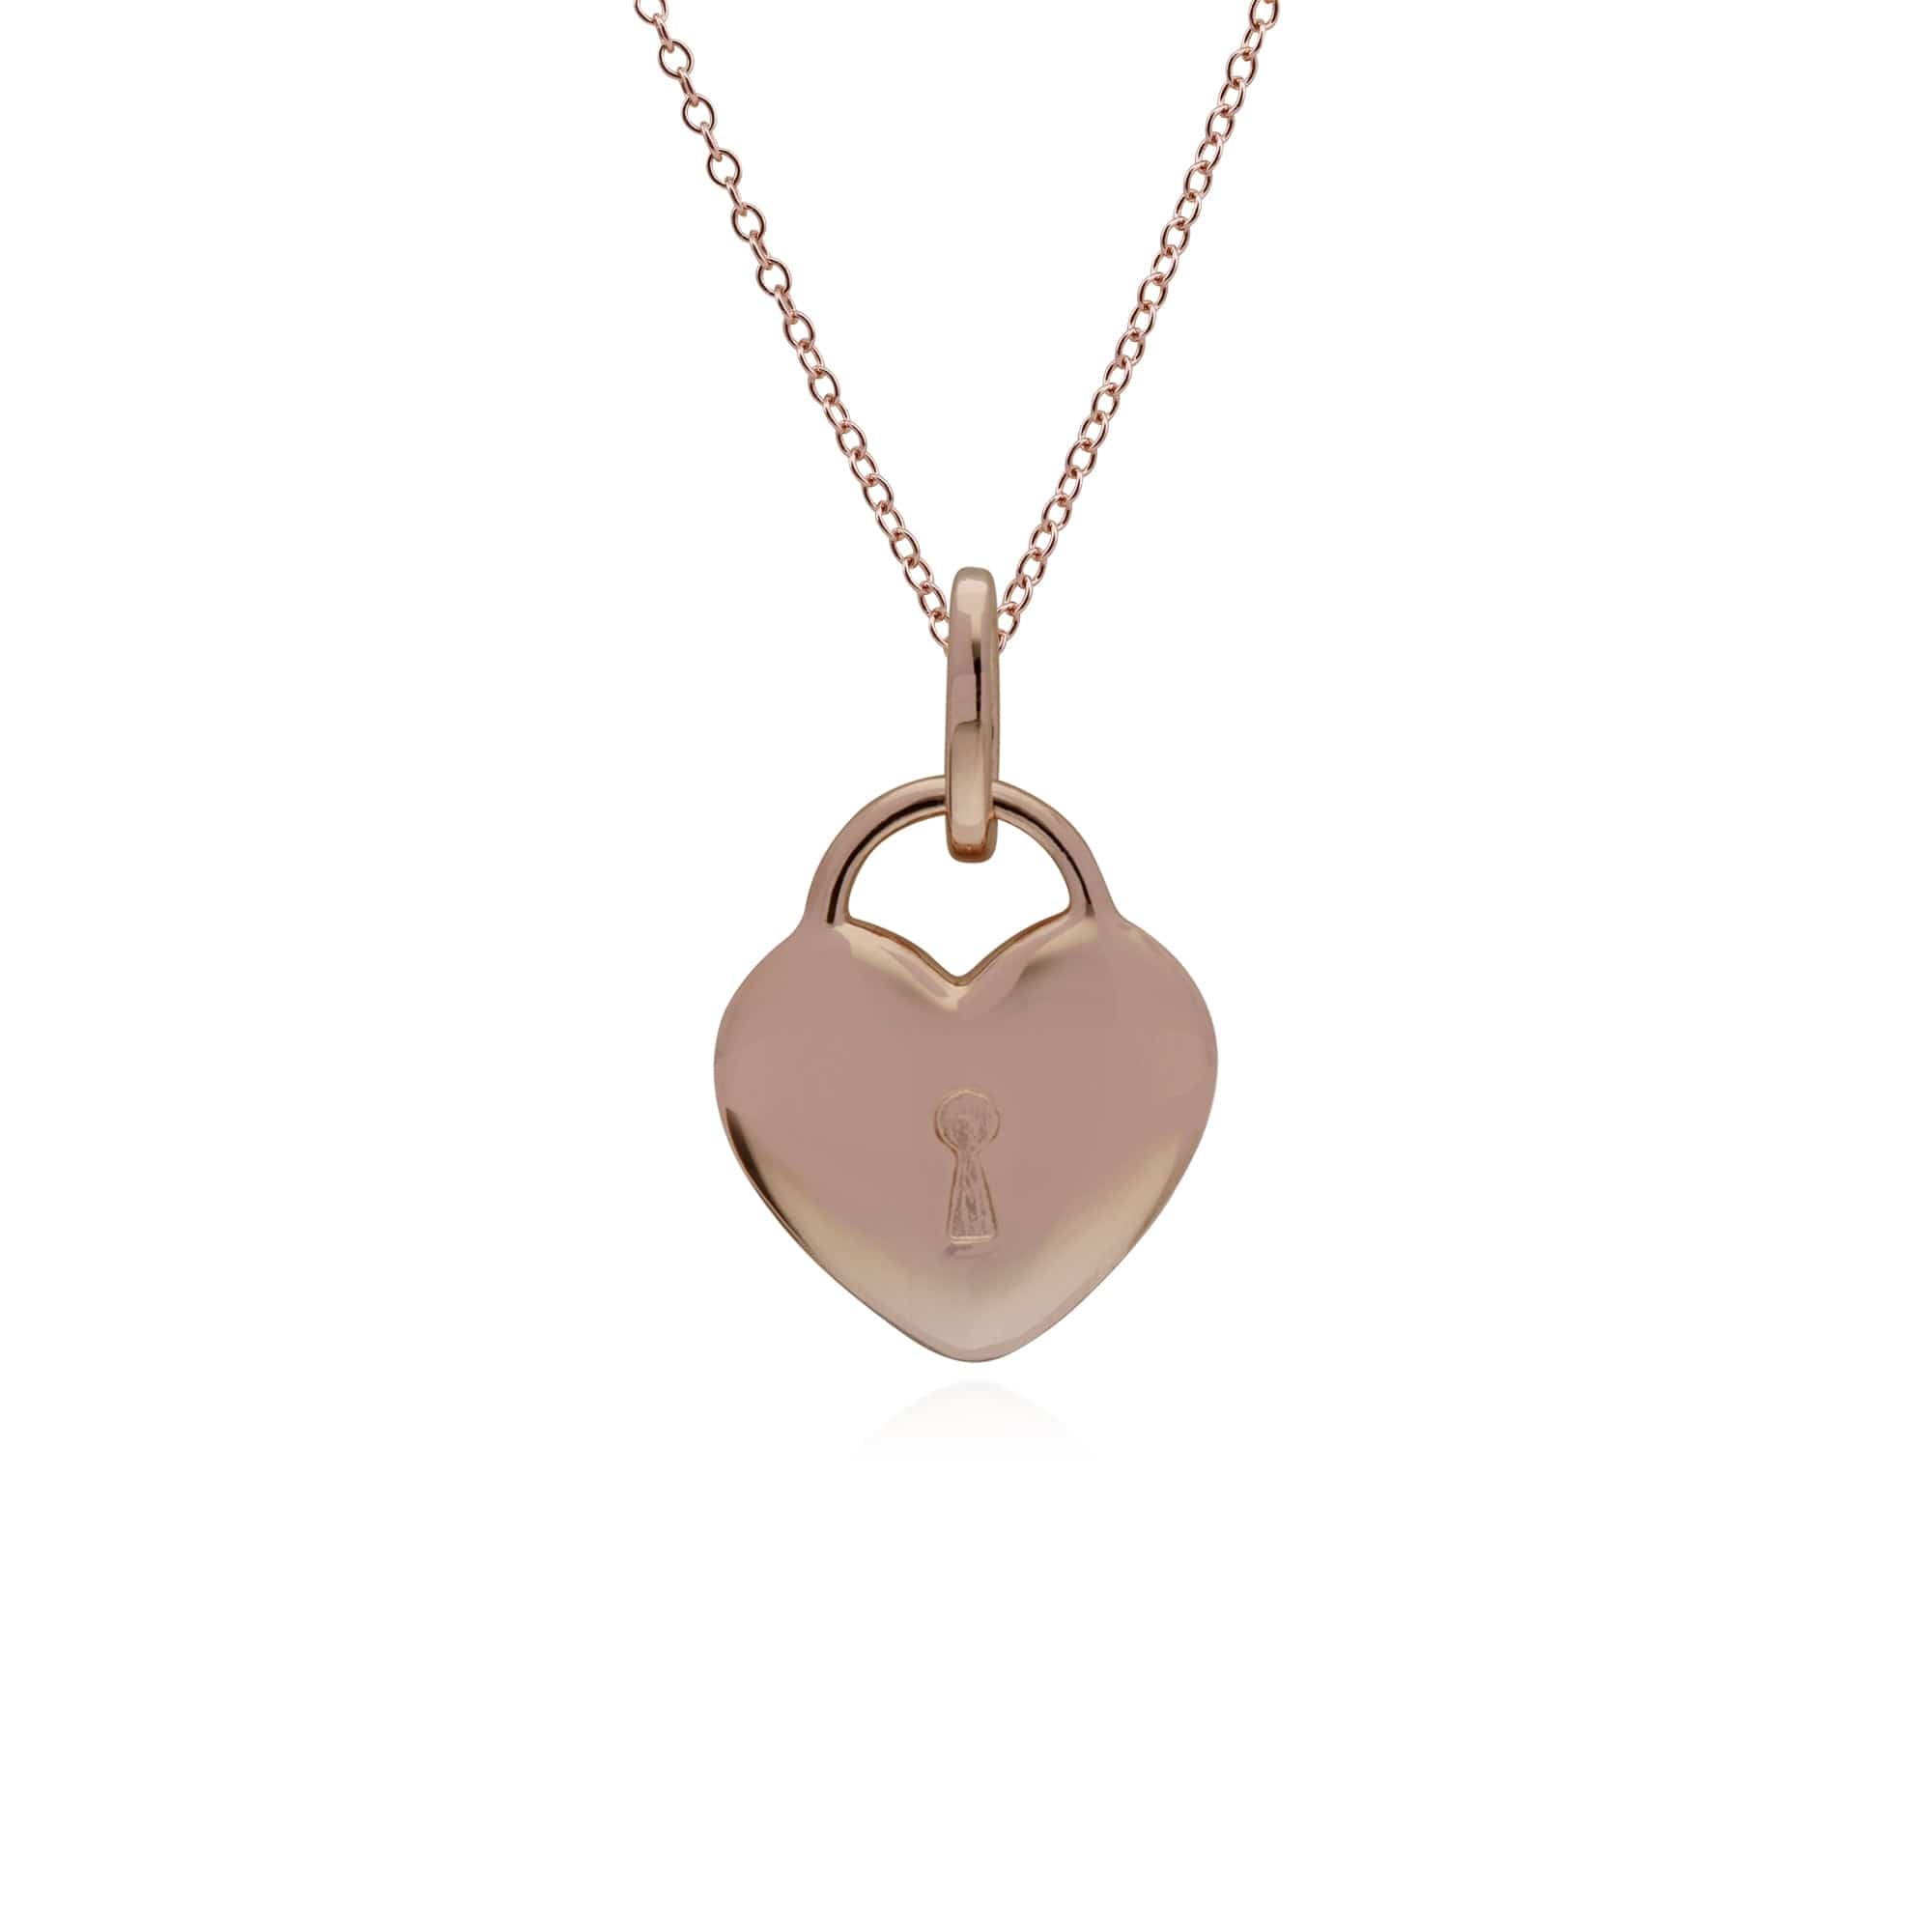 270P027301925-270P026901925 Classic Heart Lock Pendant & Amethyst Charm in Rose Gold Plated 925 Sterling Silver 3